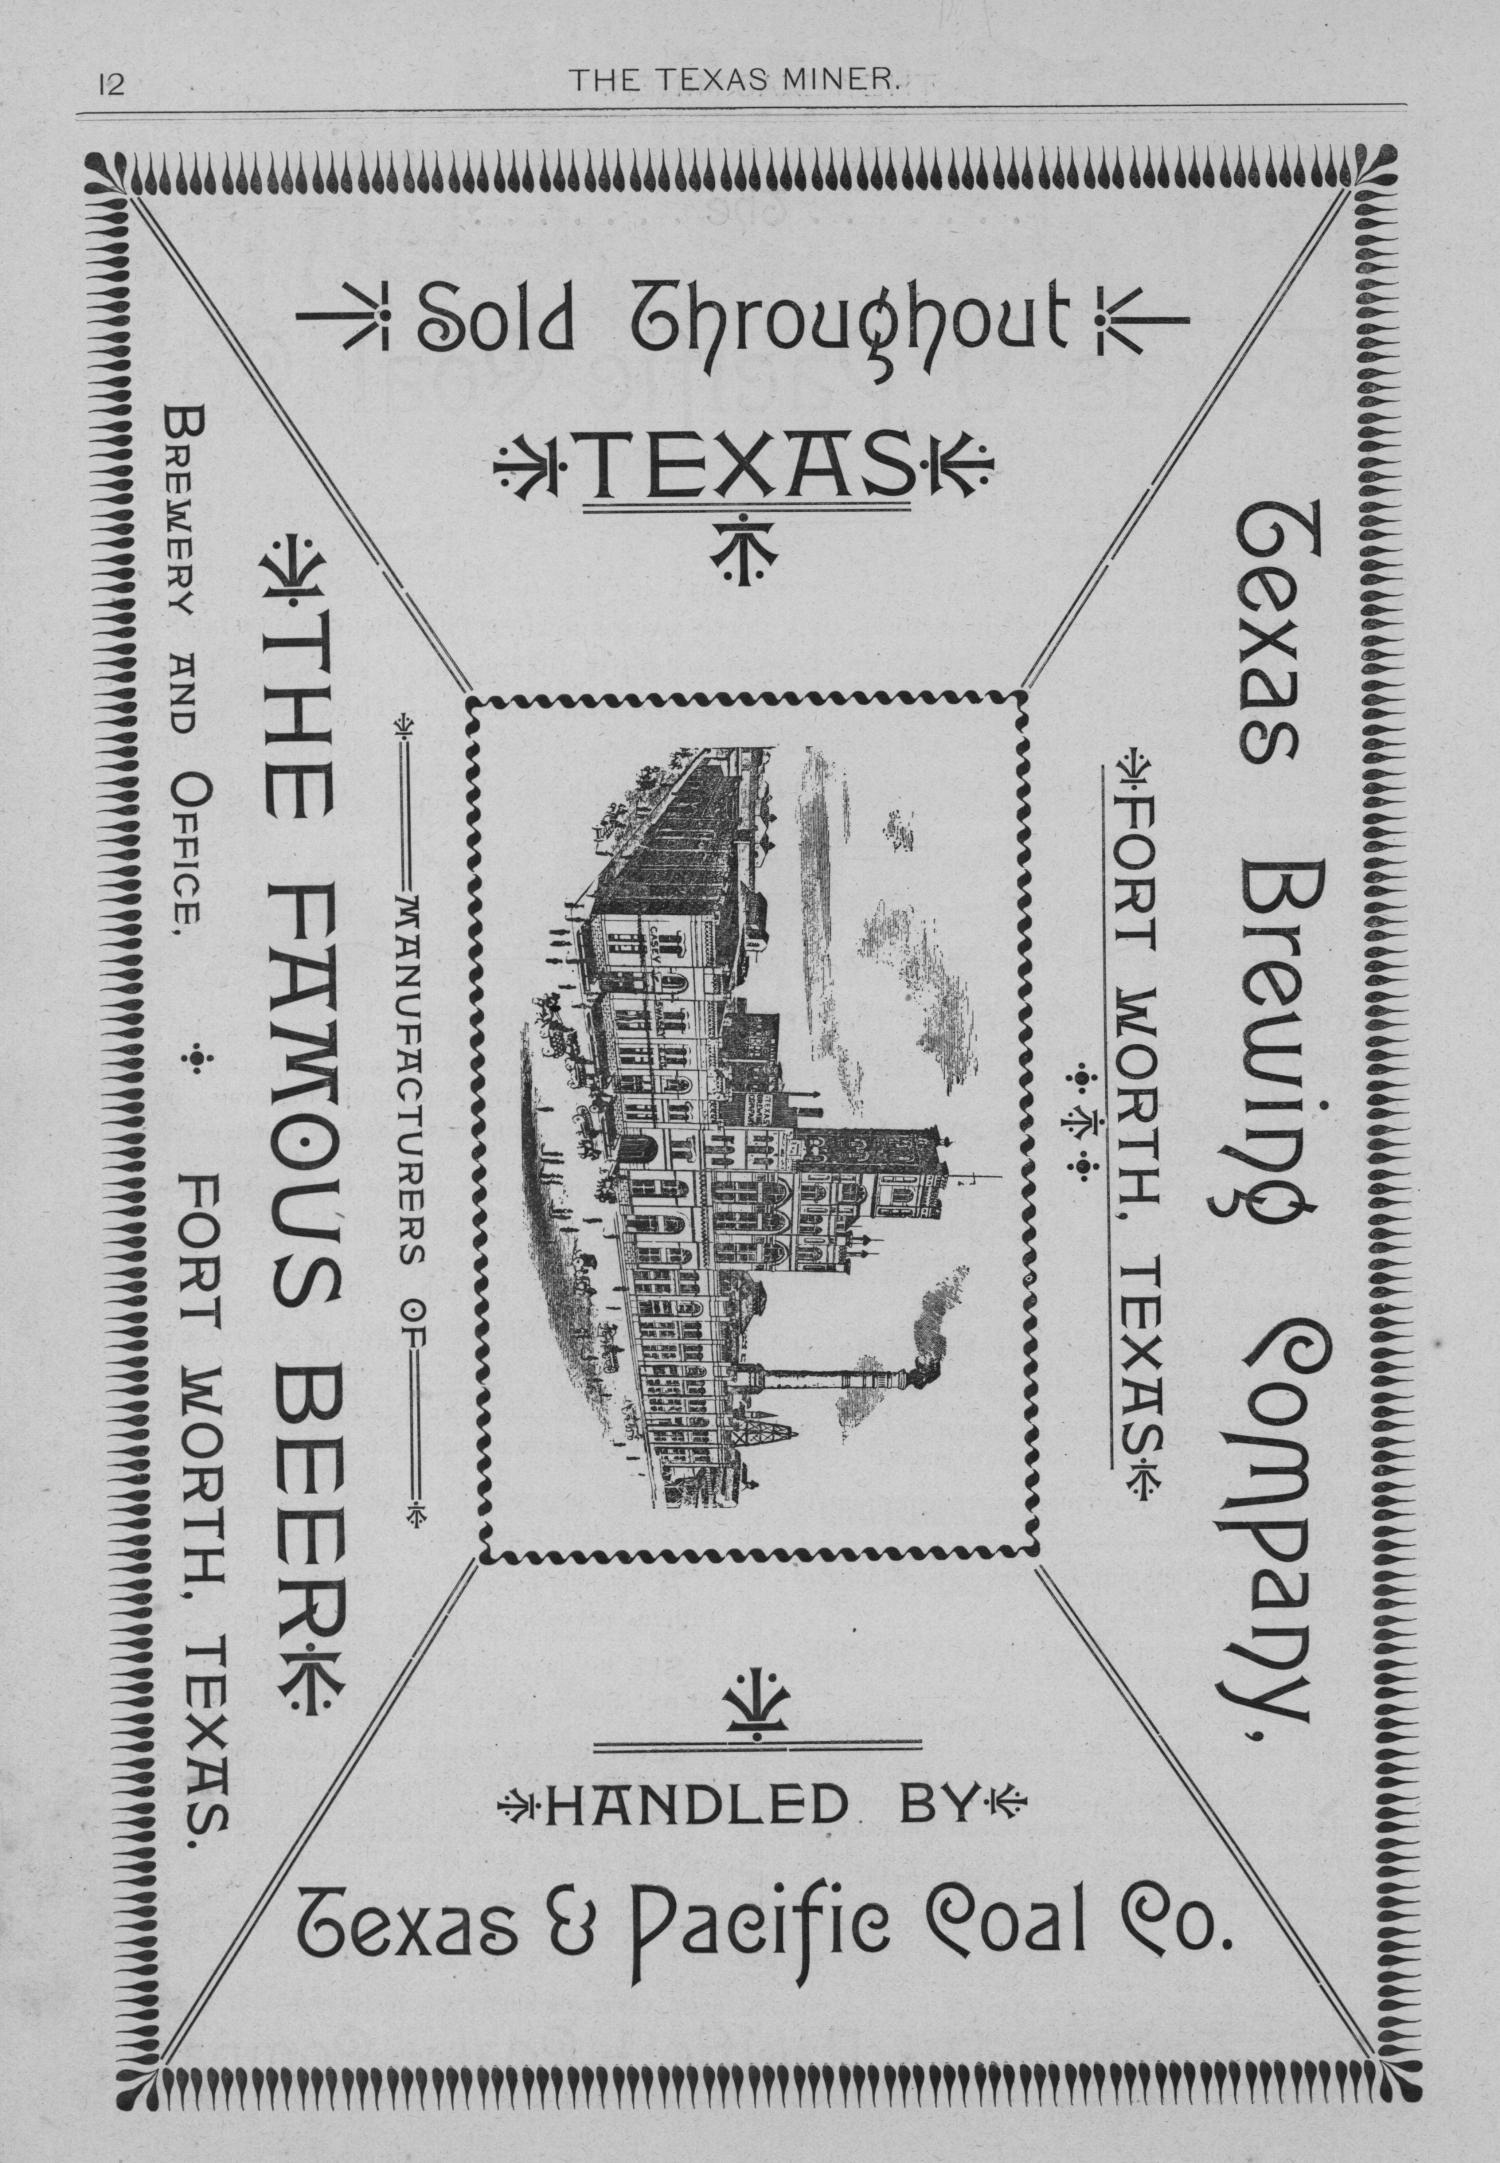 The Texas Miner, Volume 1, Number 10, March 24, 1894
                                                
                                                    12
                                                